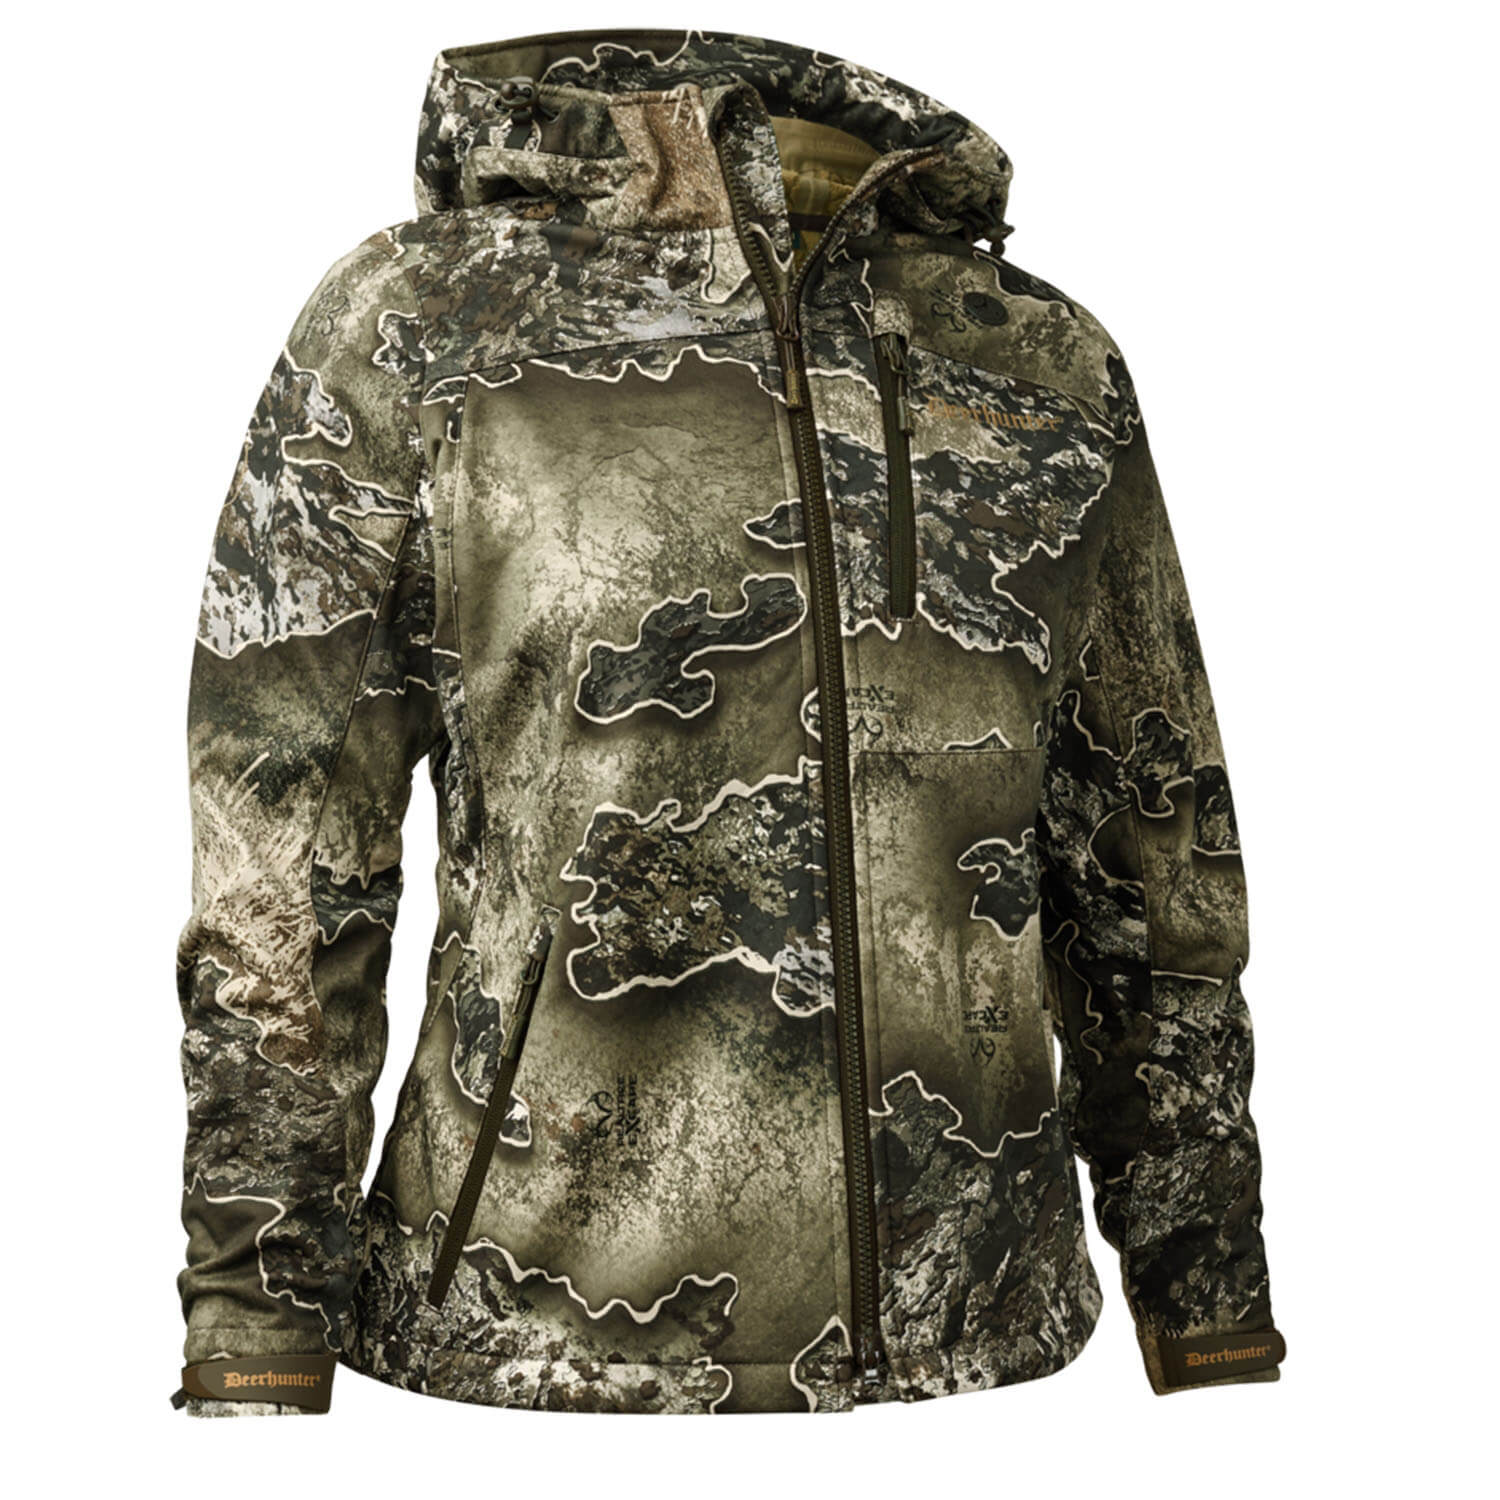 Deerhunter Softshell Jacket Lady Excape (realtree excape) - Hunting Jackets